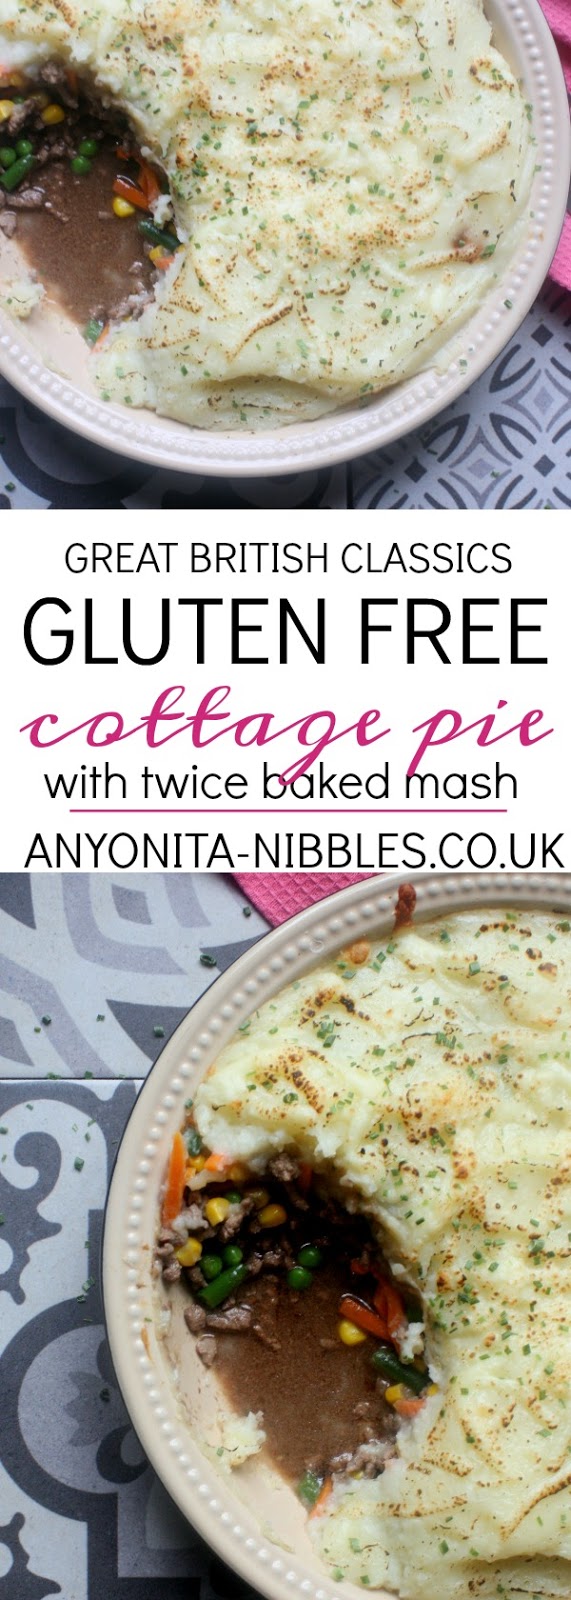 This classic gluten free shepherd's pie is bursting with seasonal vegetables, succulent steak mince and topped with luscious velvet twice-baked mashed potatoes!